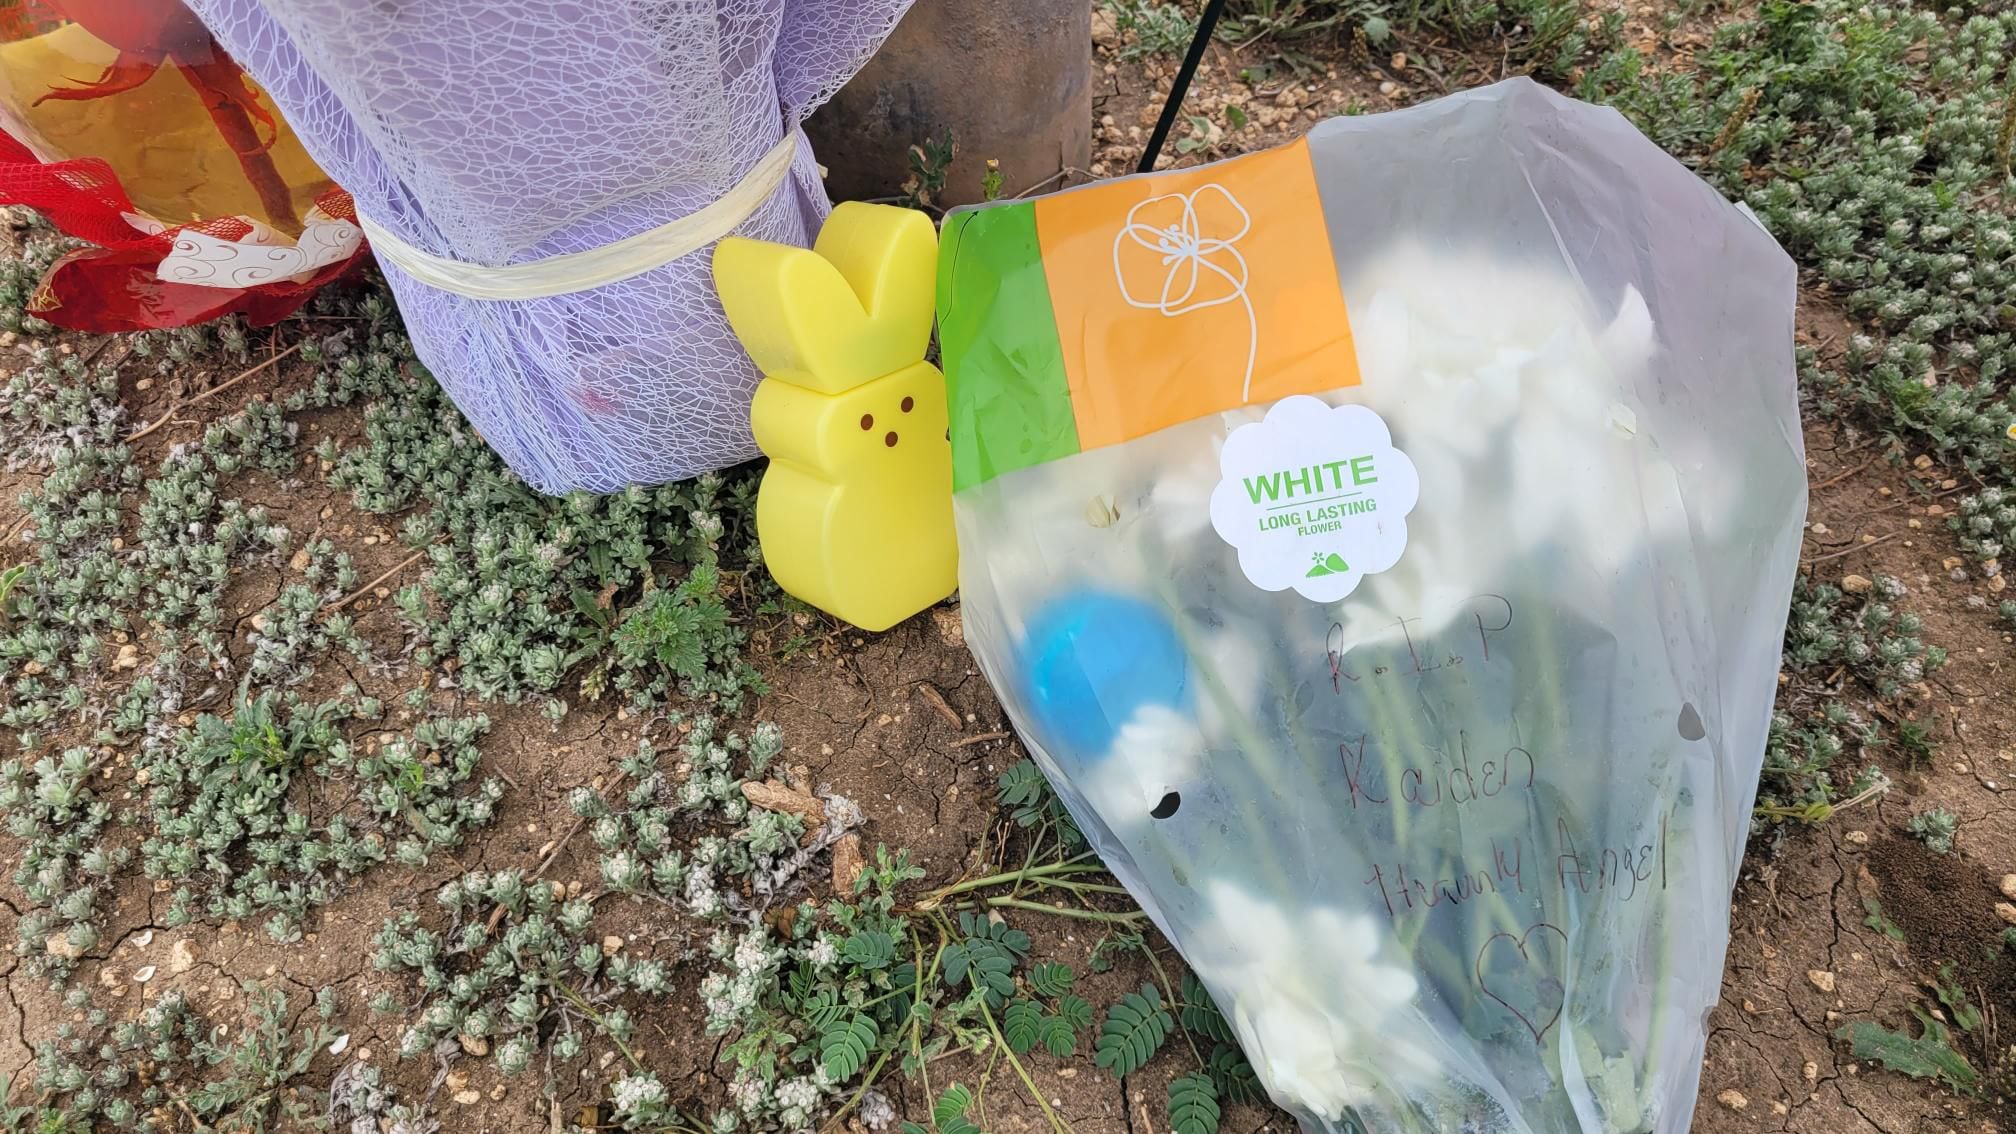 A stranger left a bunny-shaped bottle of bubbles amid flowers and balloons in Tom Slick Park. The bodies of Savannah Kriger, 32, and Kaiden Kriger, 3, were found nearby.